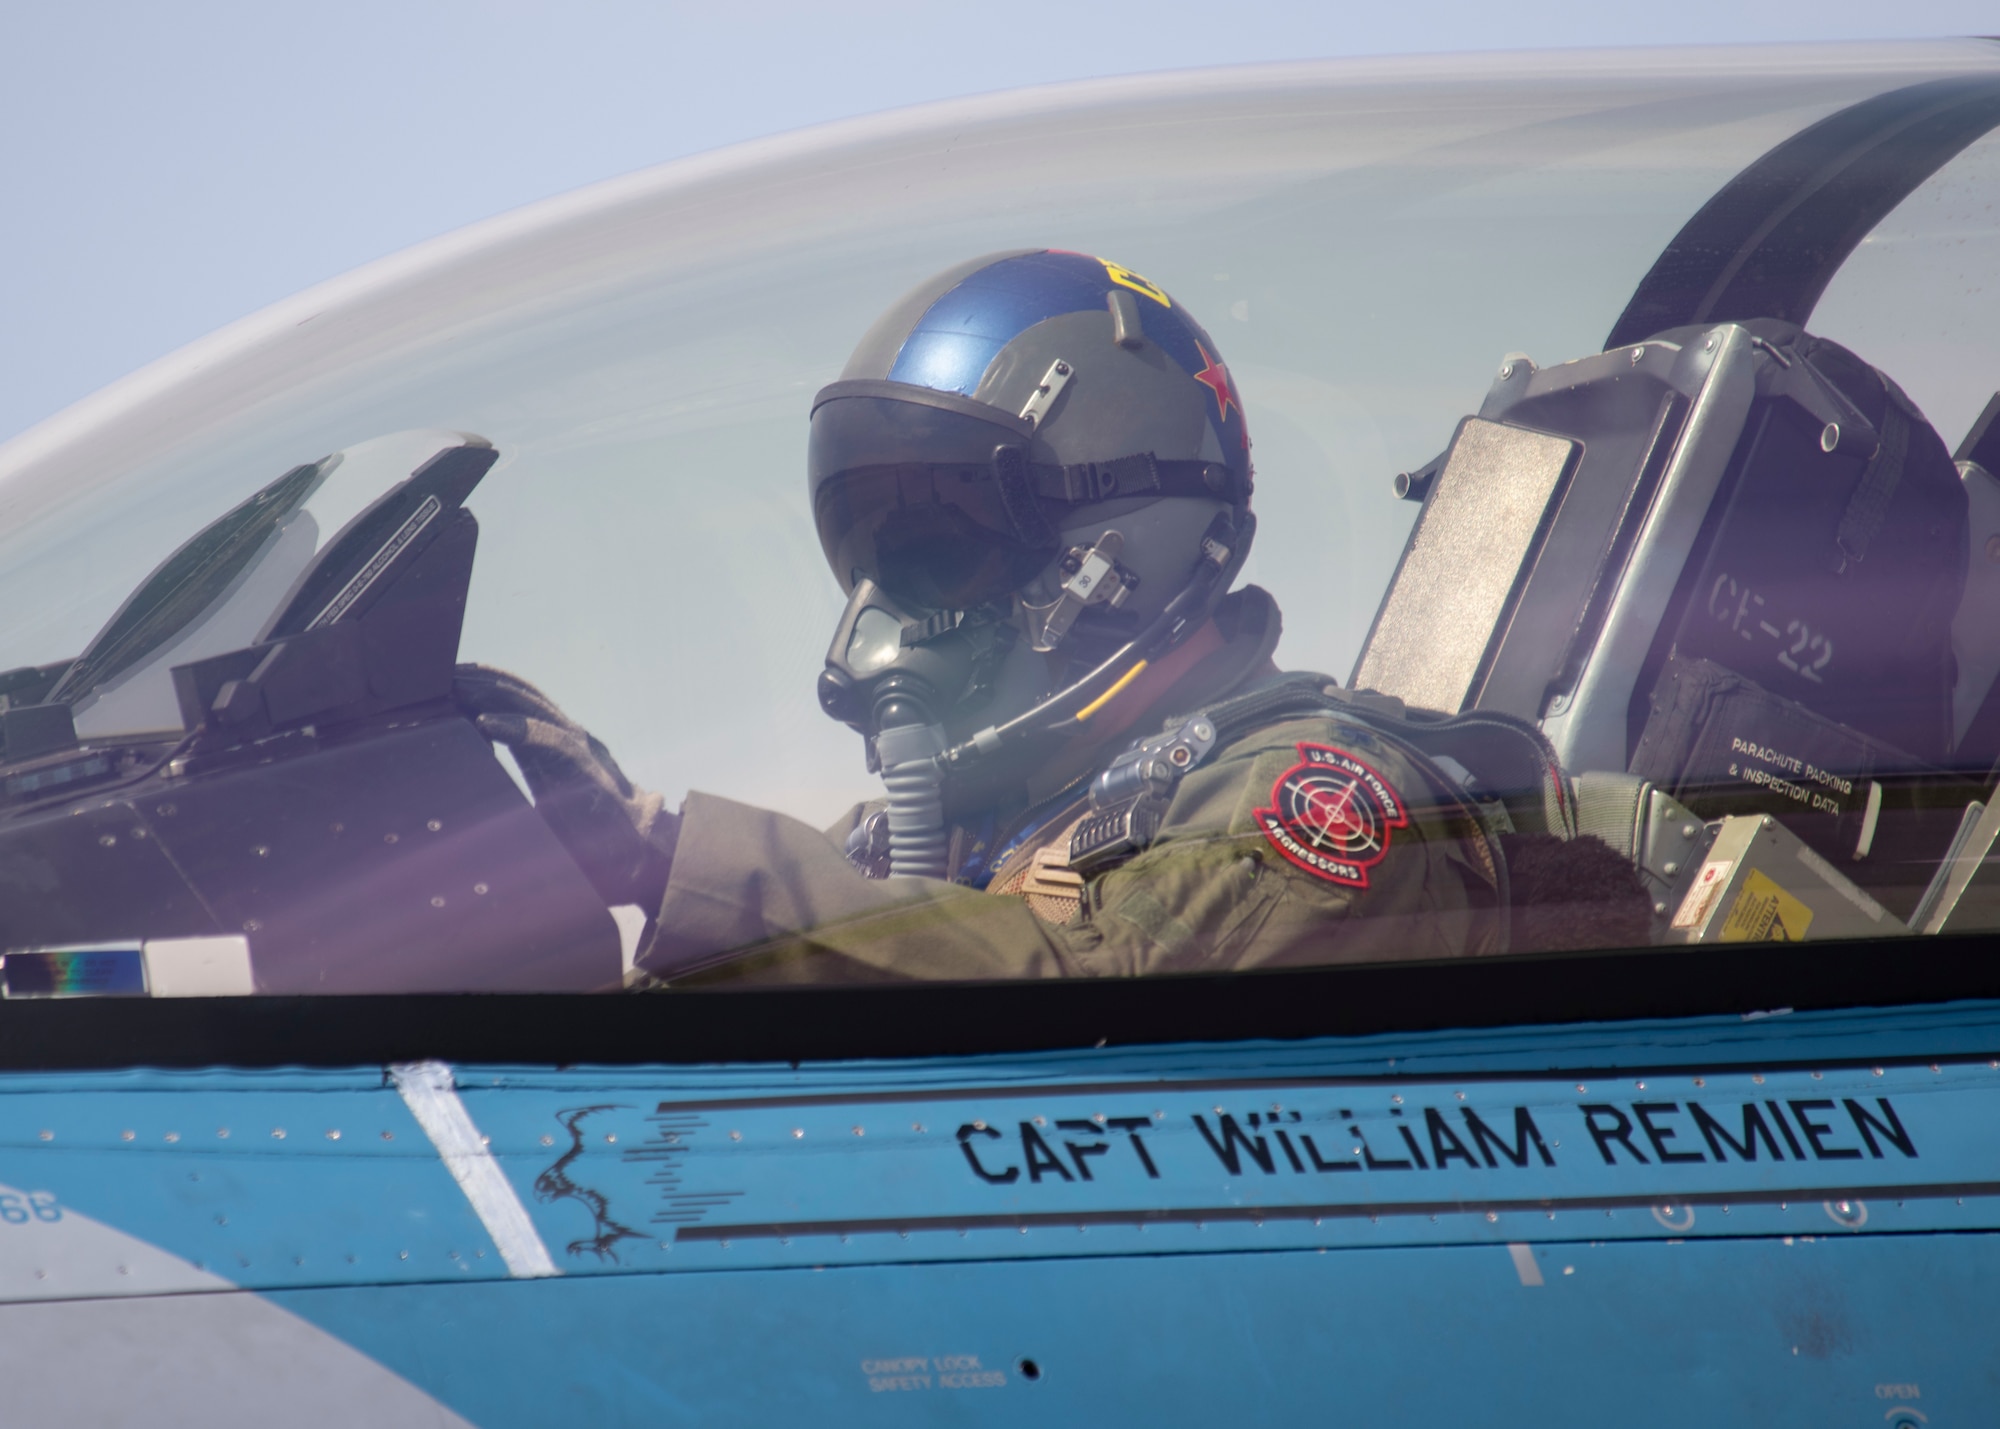 U.S. Air Force Lt. Col. Christopher “Coach” McGoffin, 18th Aggressor Squadron F-16 Fighting Falcon pilot, preps his display before a training sortie as part of the Red Flag 22-2 exercise at Eielson Air Force Base, Alaska, June 16, 2022. The Aggressors are dedicated to playing the “red team” adversaries against “blue team” allies during Red Flag aerial training missions. The Red Flag Exercise was established in 1975 and serves as a two-week advanced aerial combat training exercise held multiple times a year by the USAF, alongside joint partner and allied air and ground forces. (U.S. Air Force photo by Staff Sgt. Ryan Lackey)